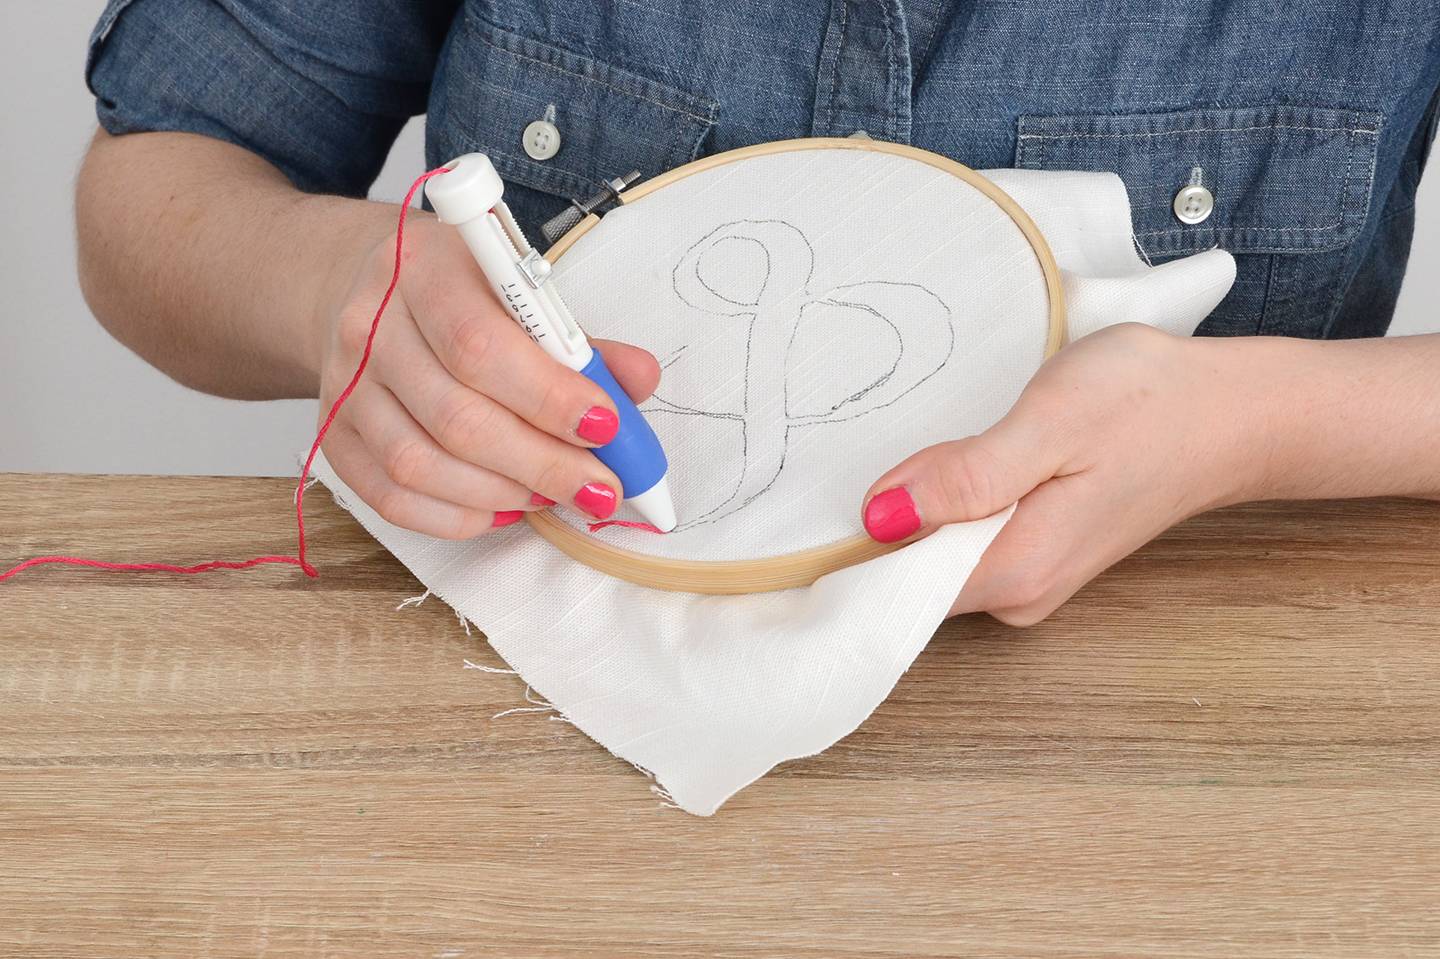 Learn How to Use Punch Needle Embroidery to Make DIY Art